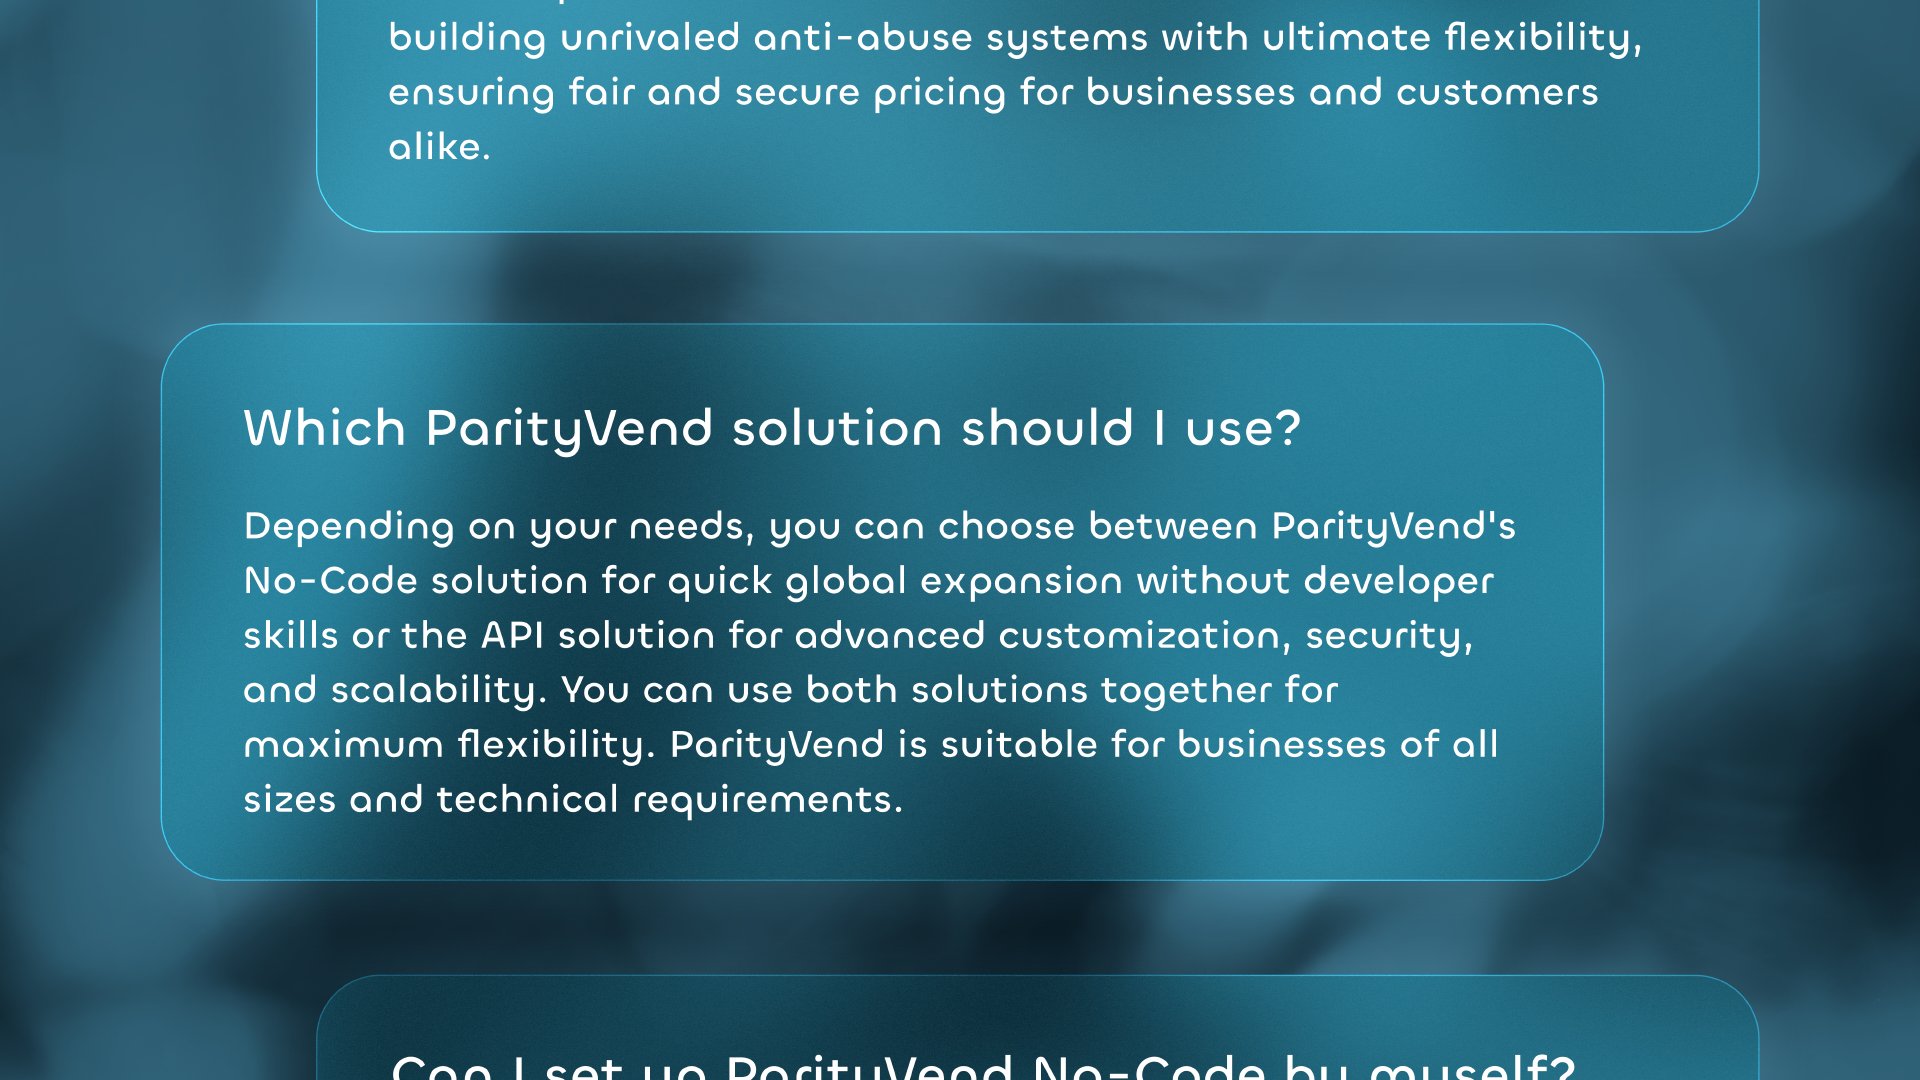 'Which ParityVend solution should I use?': Depending on your needs, you can choose between ParityVend's No-Code solution for quick global expansion without developer skills, or the API solution for advanced customization, security, and scalability. You can use both solutions together for maximum flexibility. ParityVend is suitable for businesses of all sizes and technical backgrounds.